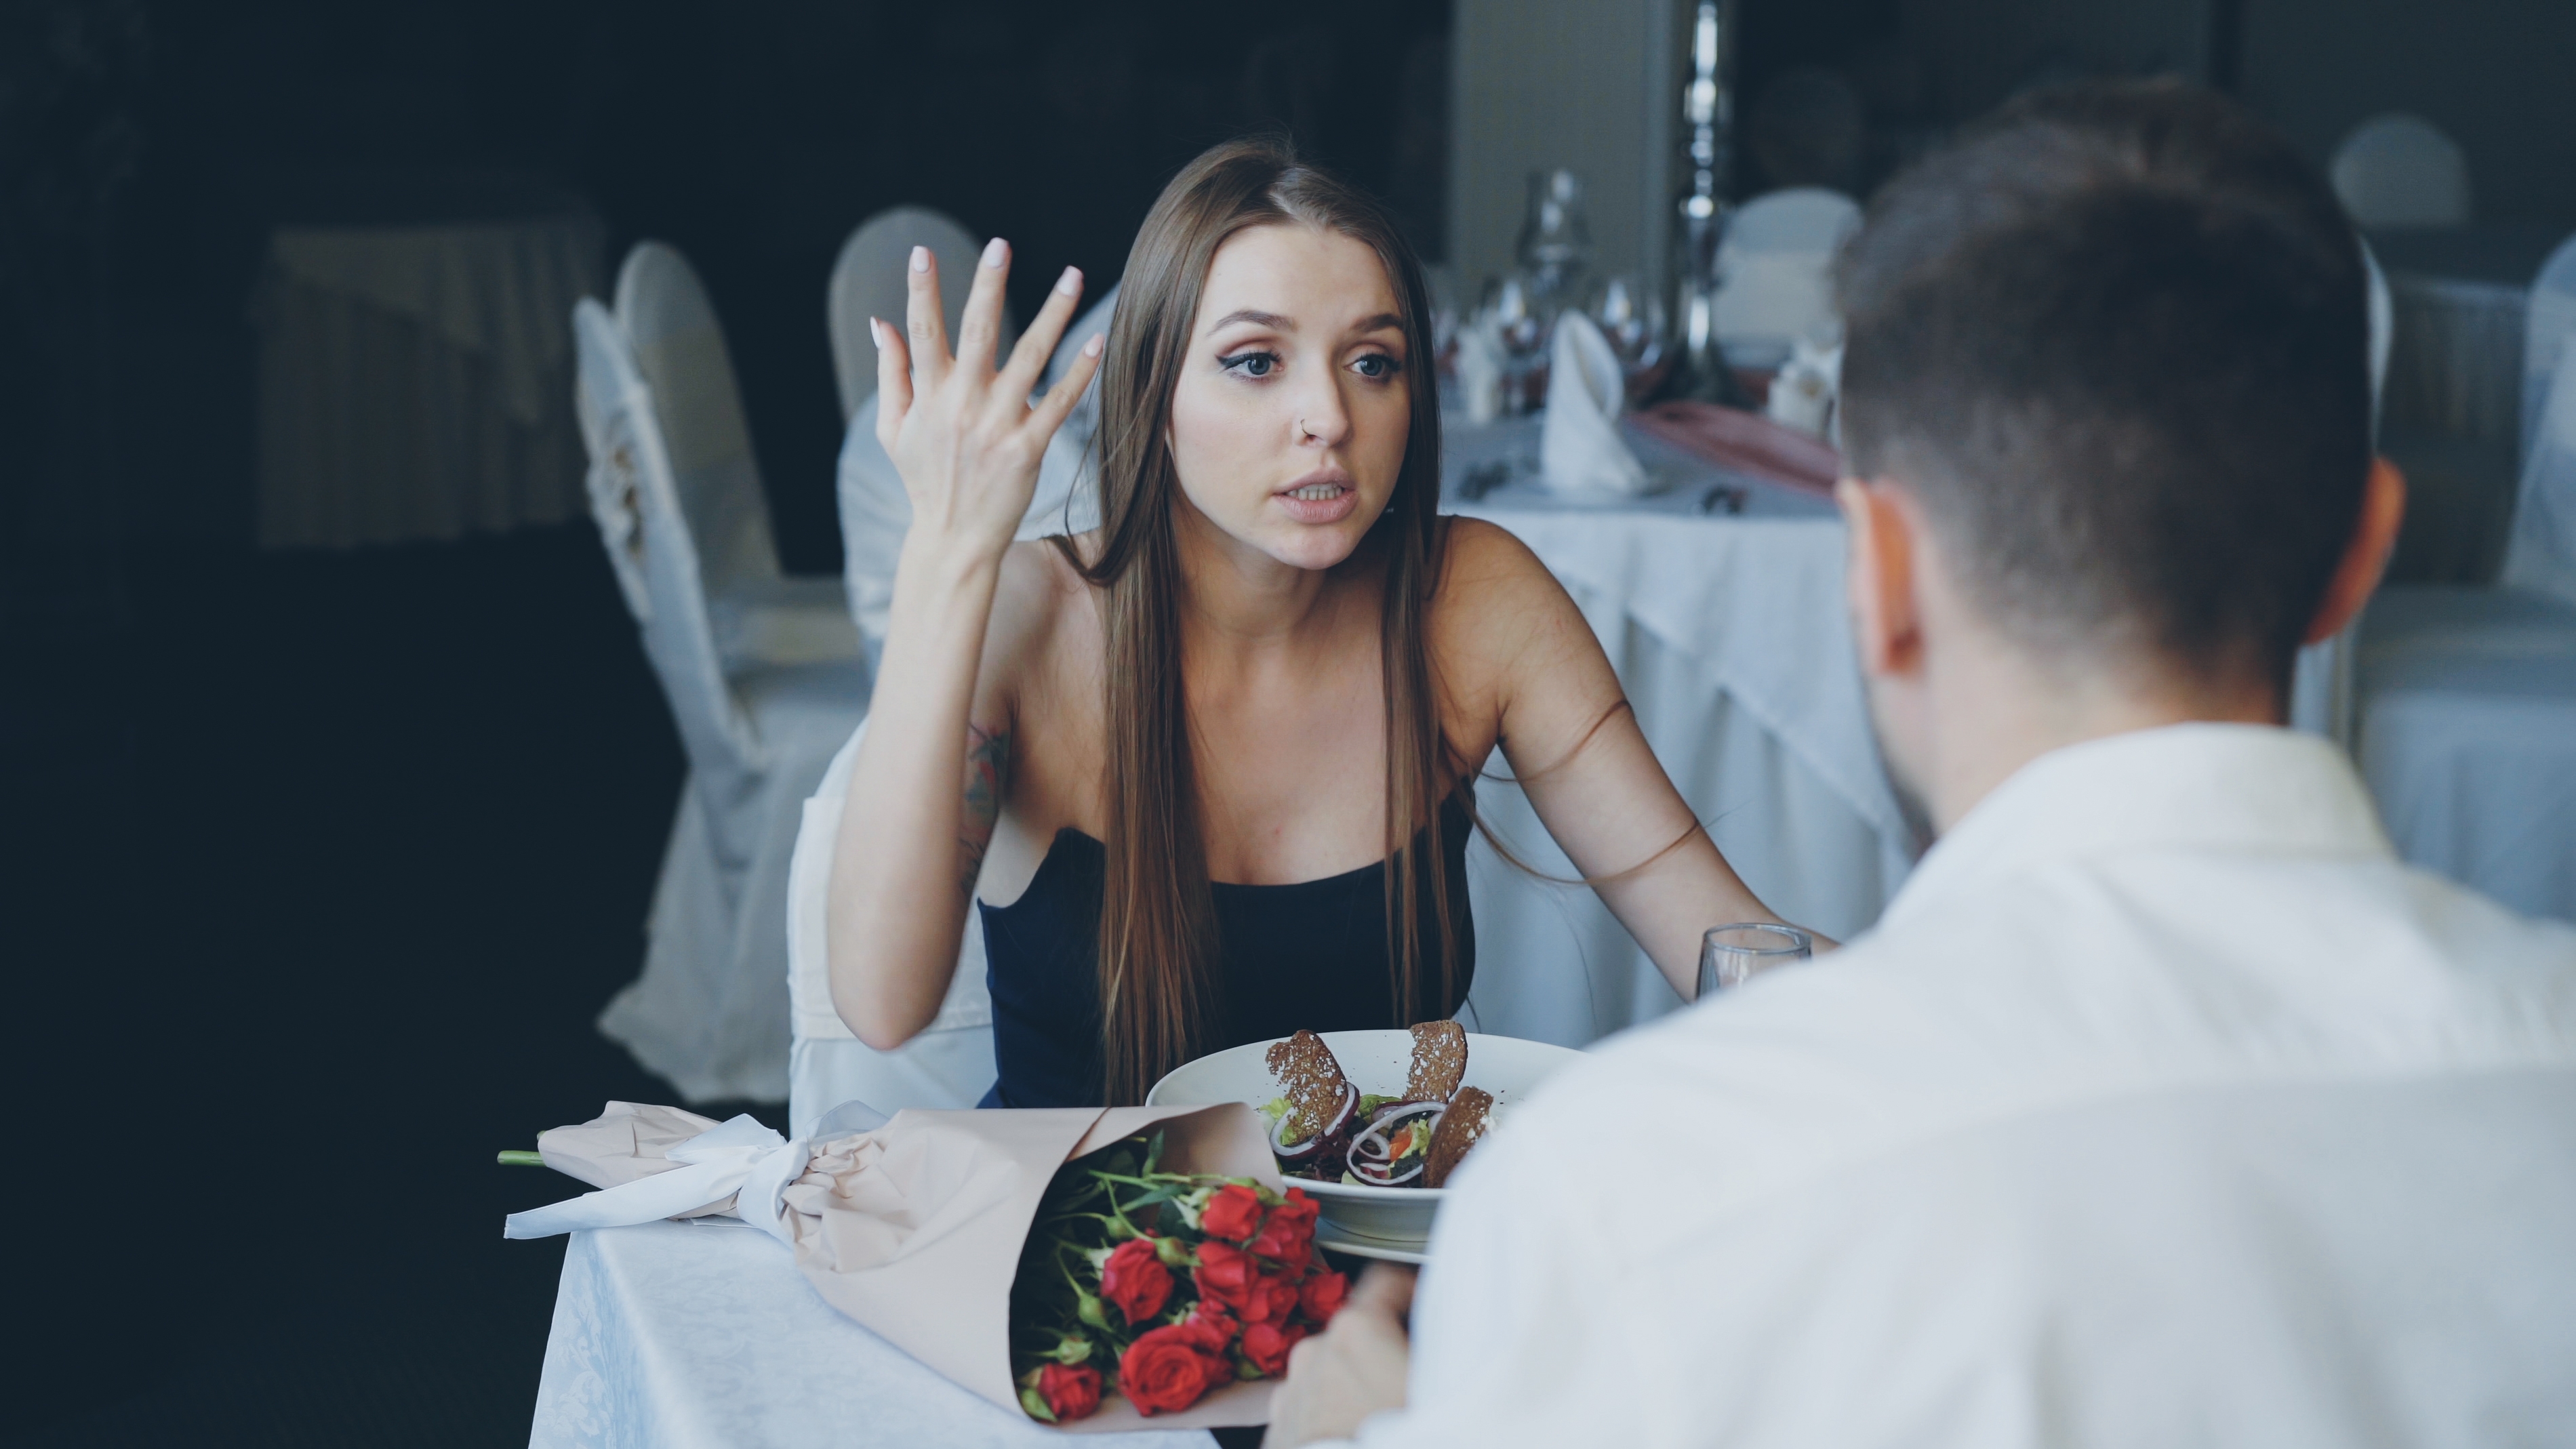 A couple arguing in a restaurant | Source: Shutterstock